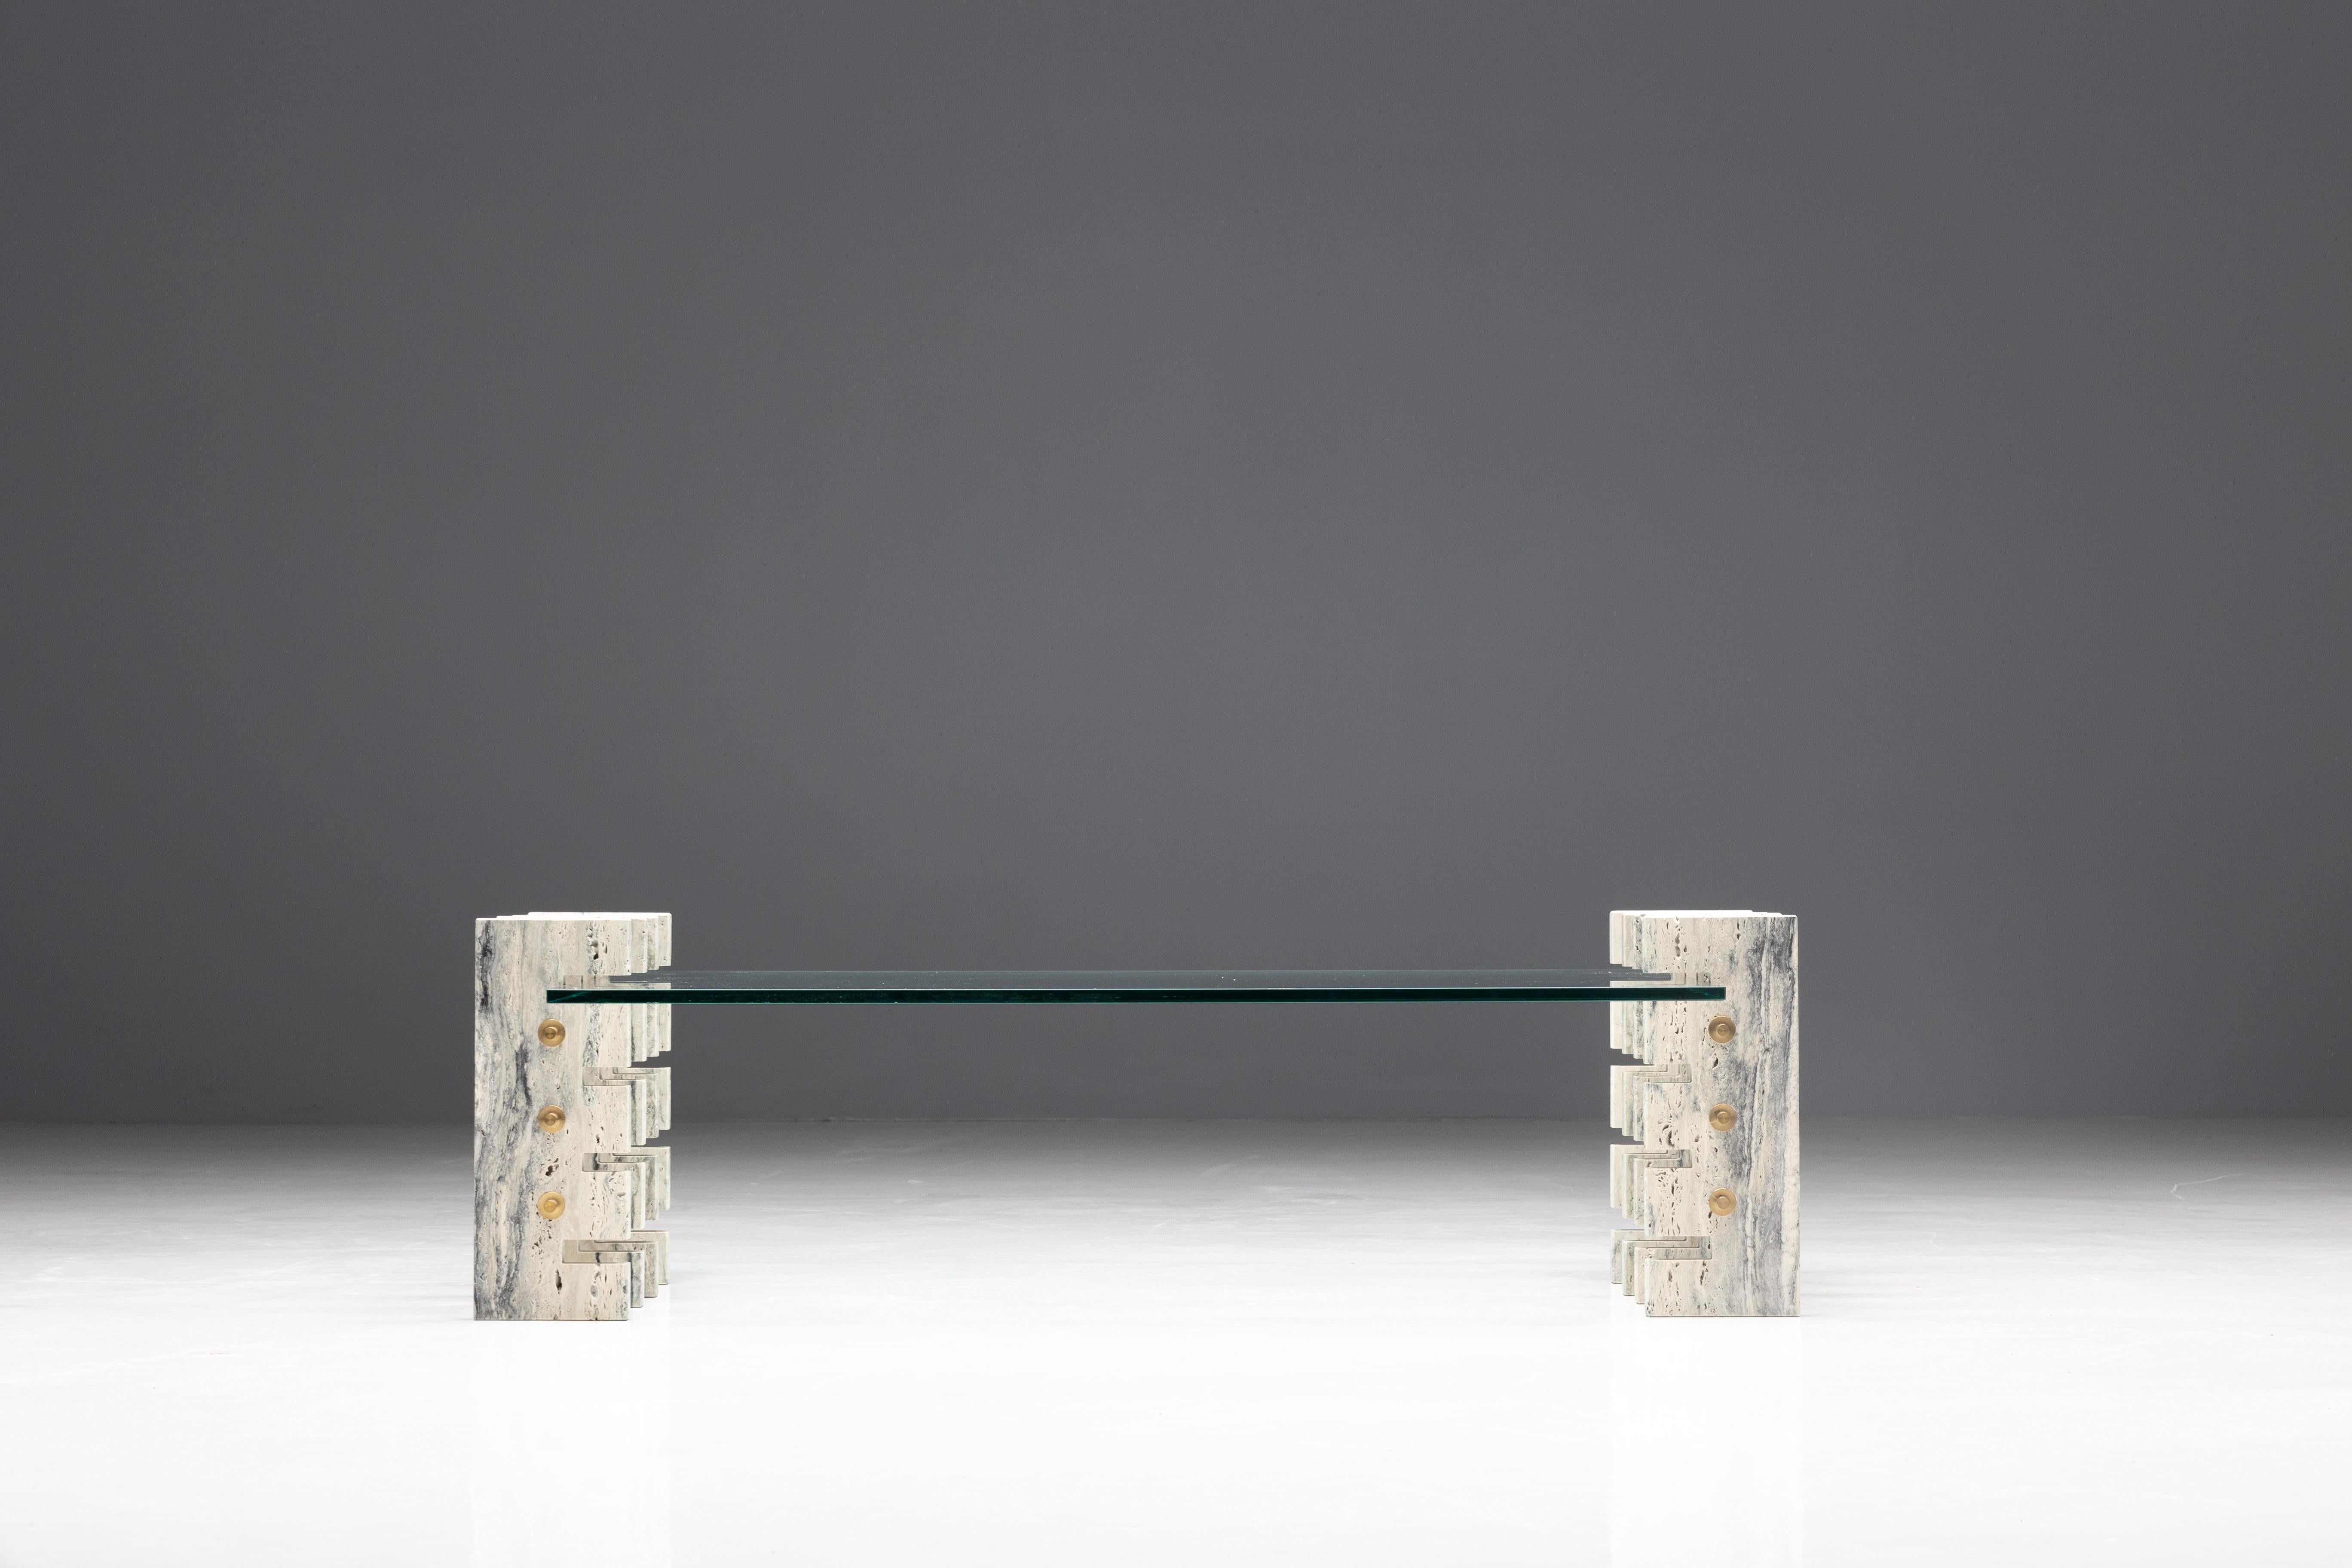 Italian Fitzroy Travertine Coffee Table by Gianfranco Ferré Home, Italy, 2010s For Sale